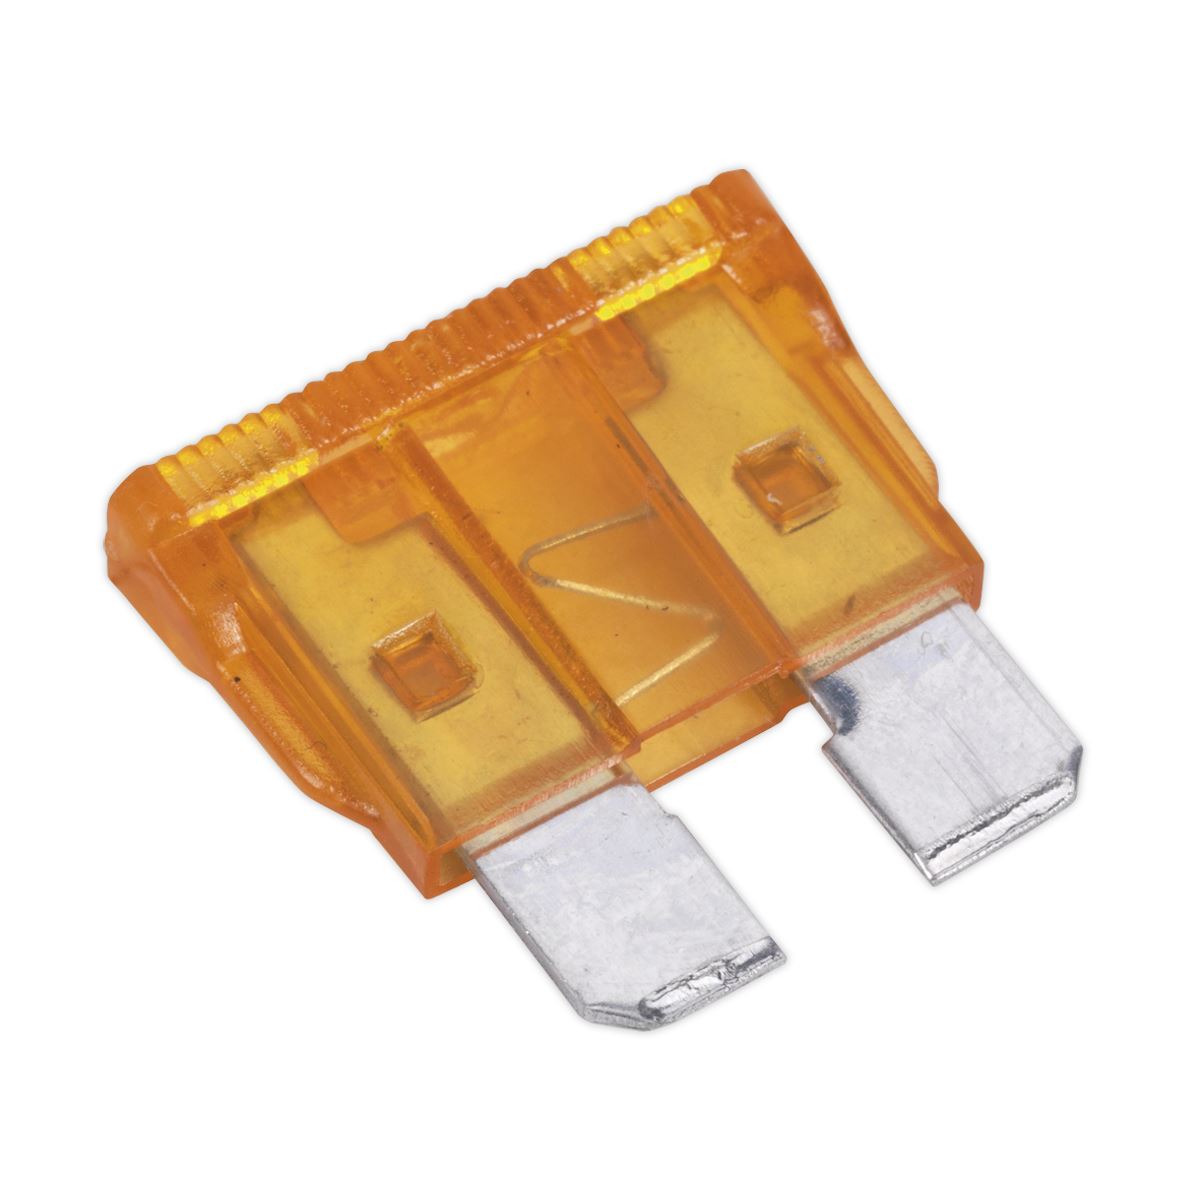 Sealey Automotive Standard Blade Fuse 5A Pack of 50